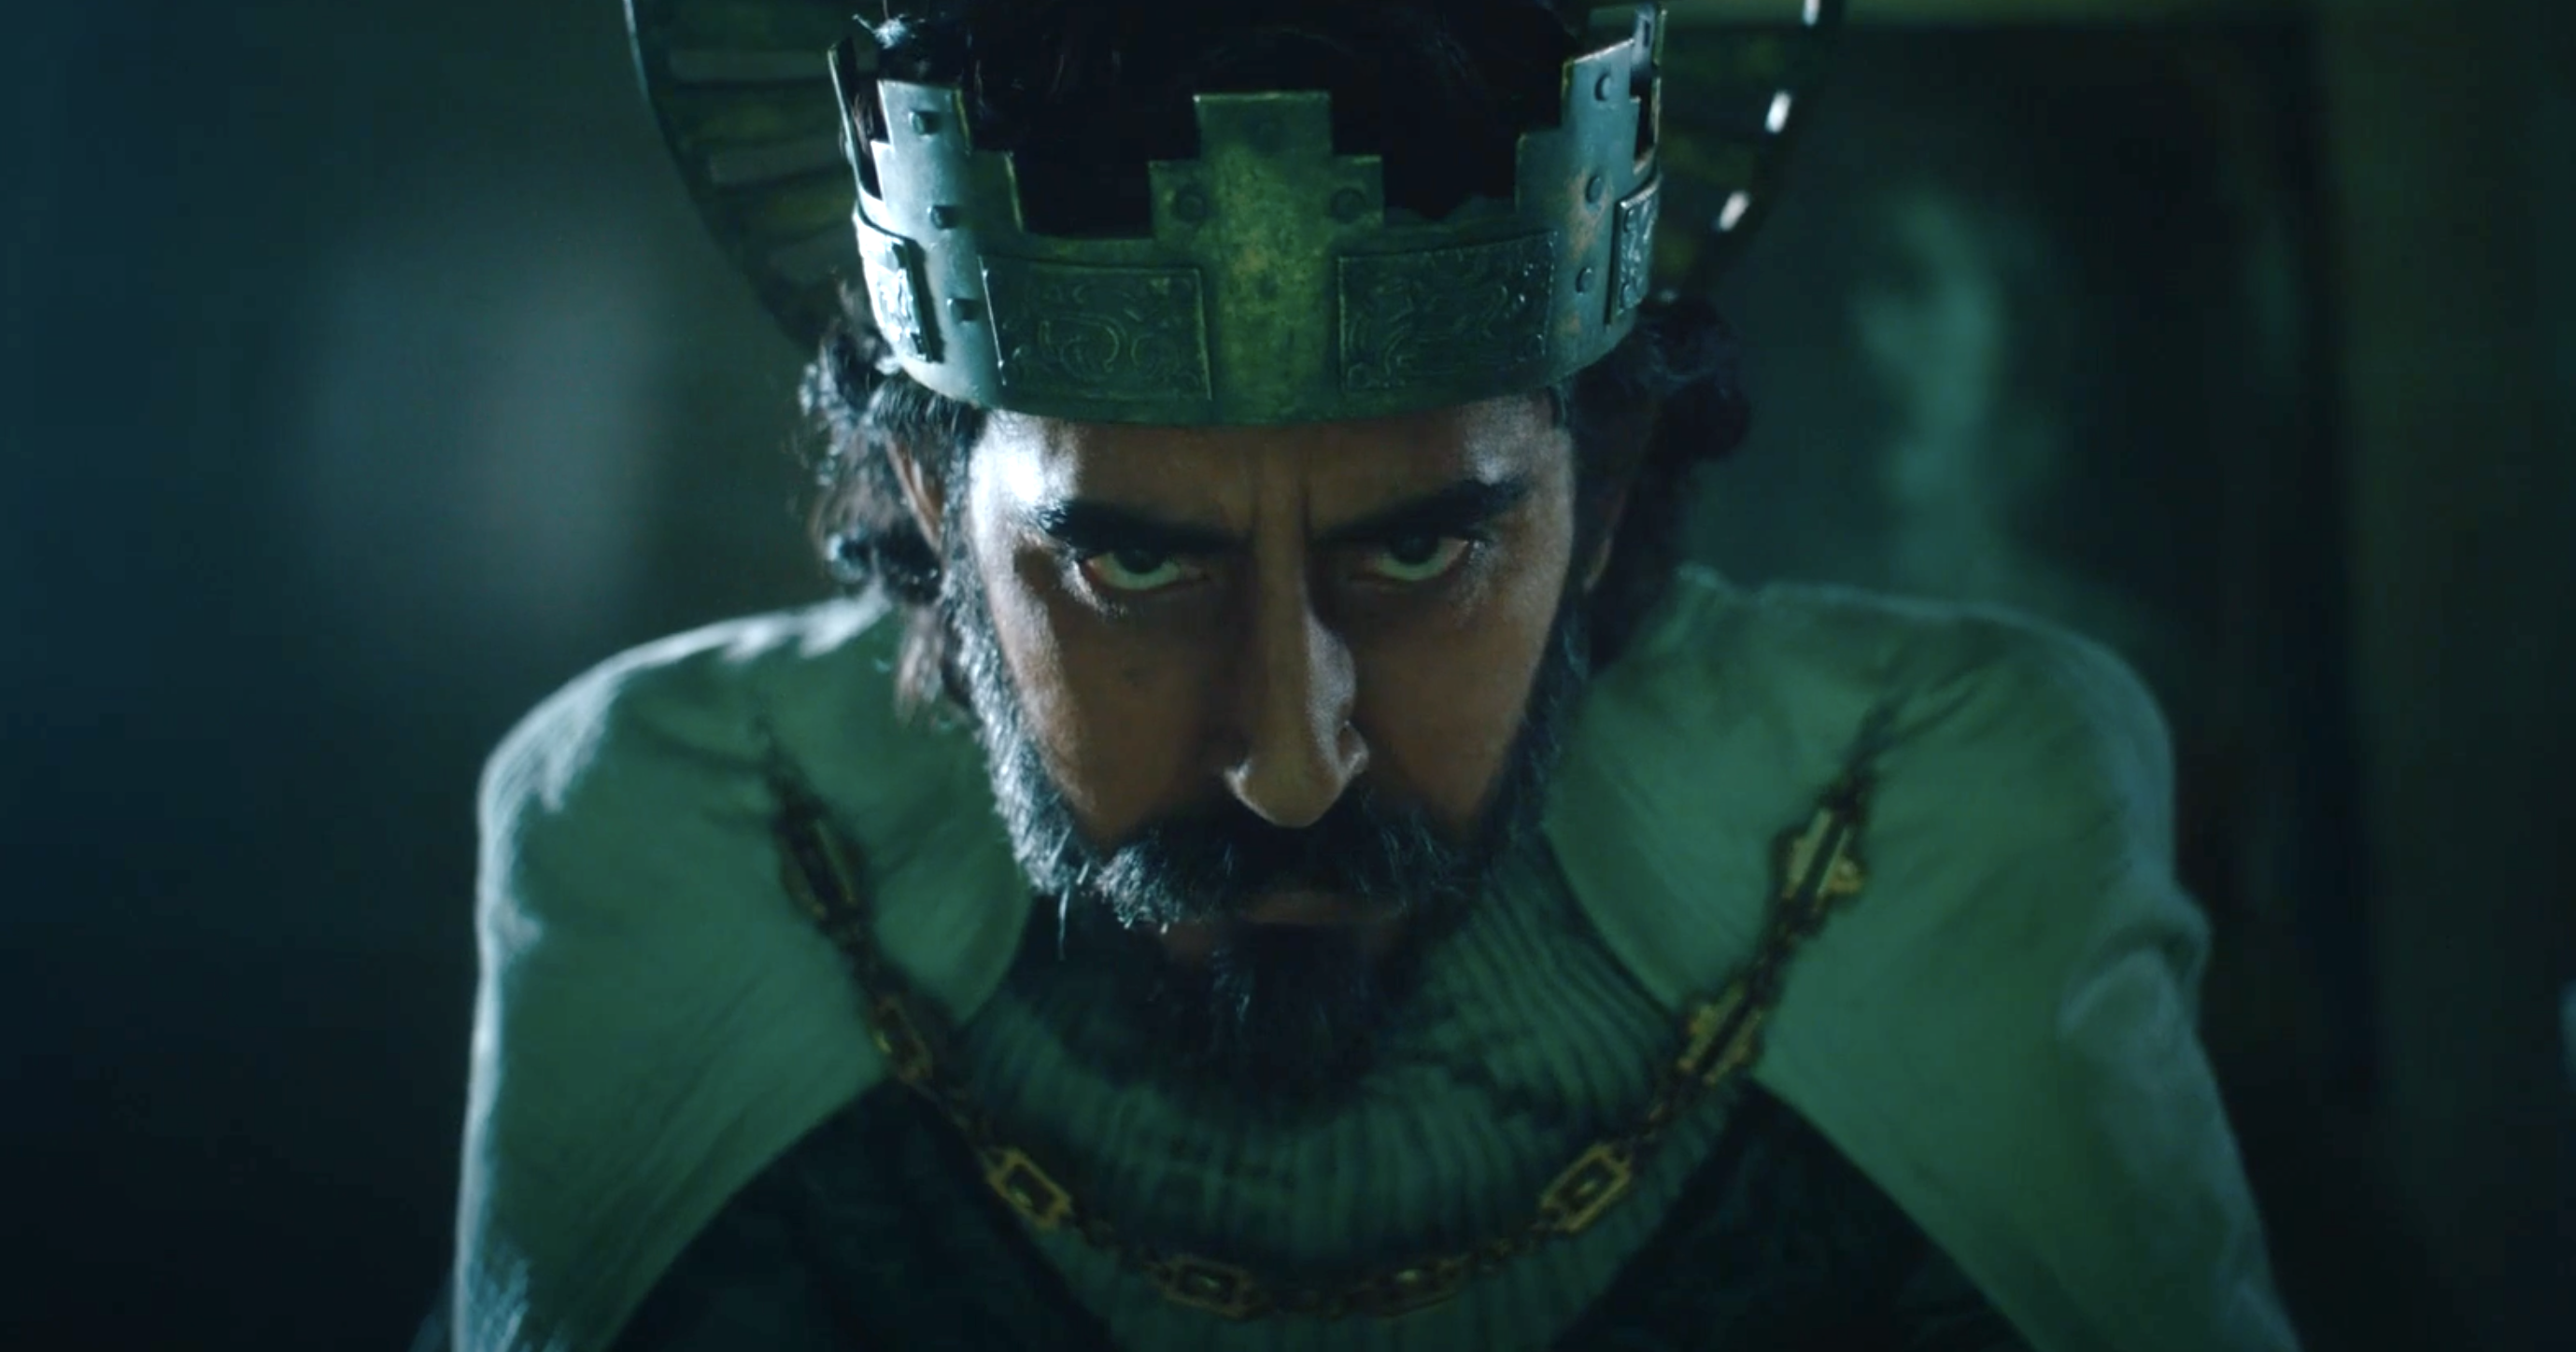 Medieval Goes Horror: 1st Look at Upcoming A24 Film ‘The Green Knight’